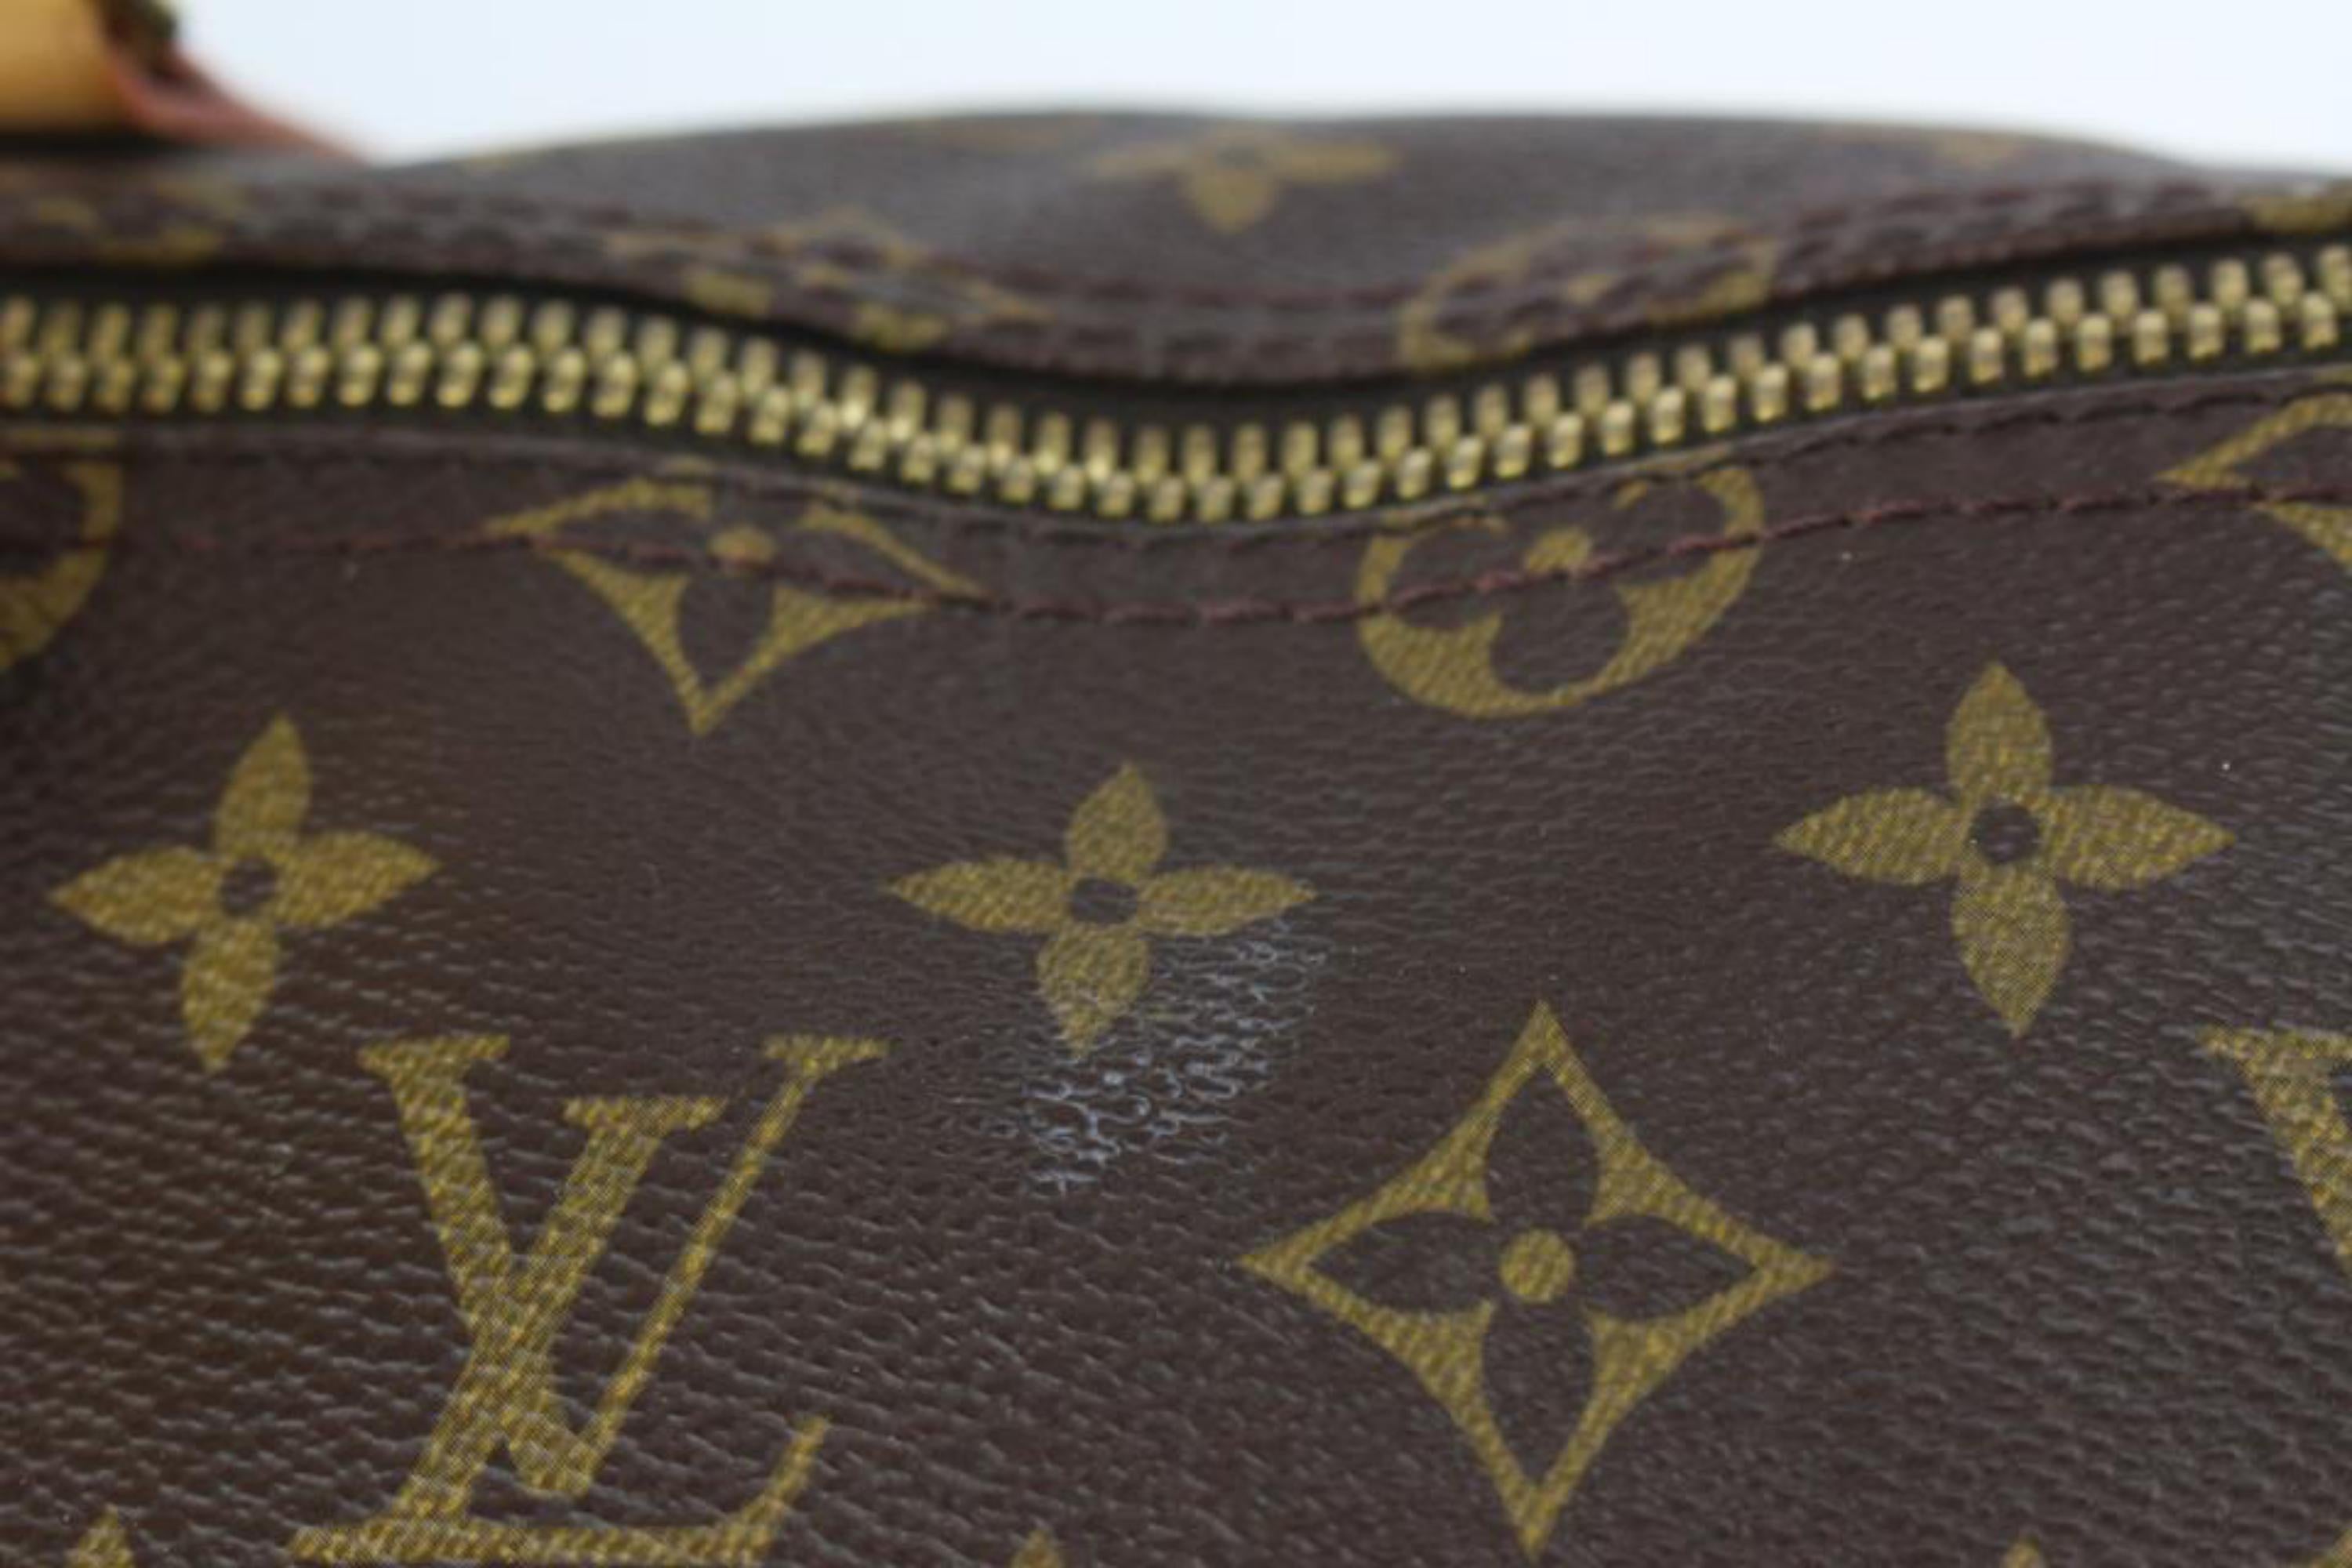 Louis Vuitton Monogram Keepall Bandouliere 45 Duffle Bag with Strap 1221lv15 5